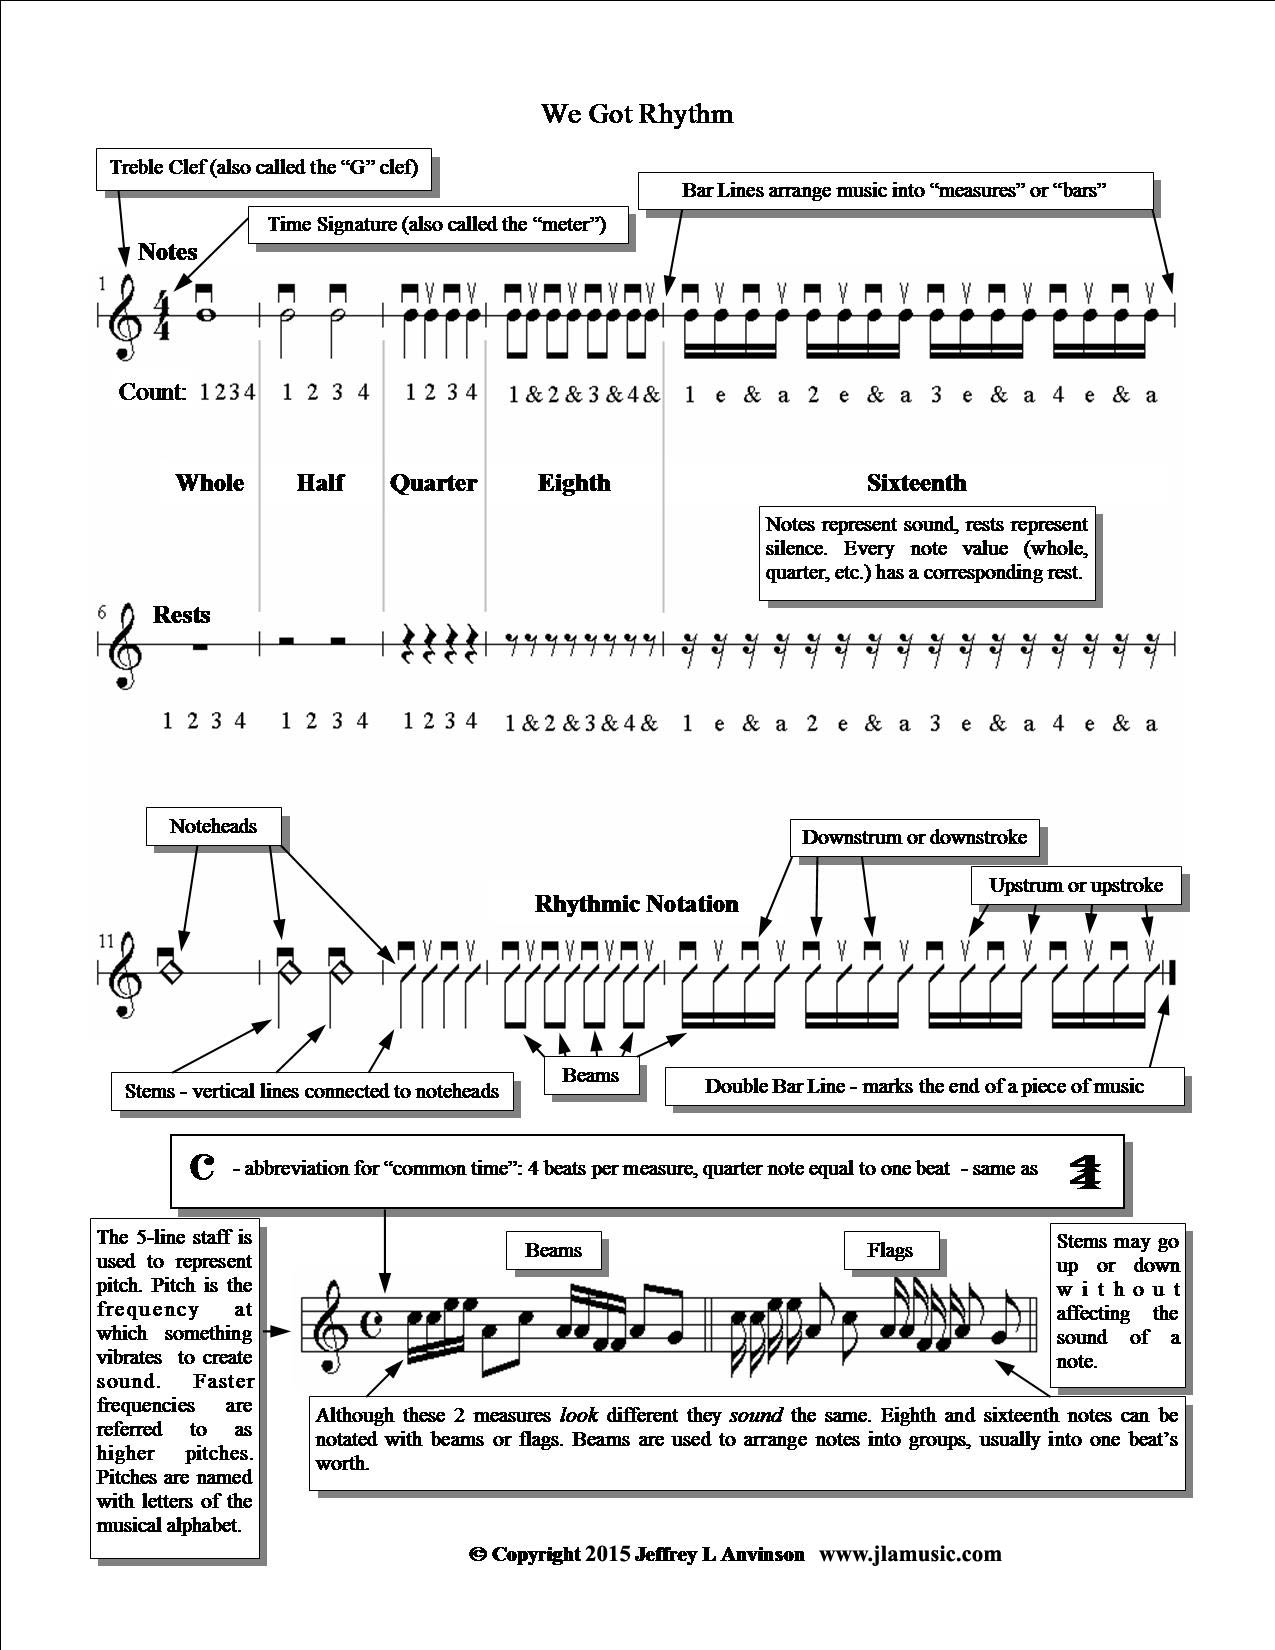 "We Got Ryhthm" a one-page reference to common rhythm terms - copyright 2015 Jeffrey L Anvinson